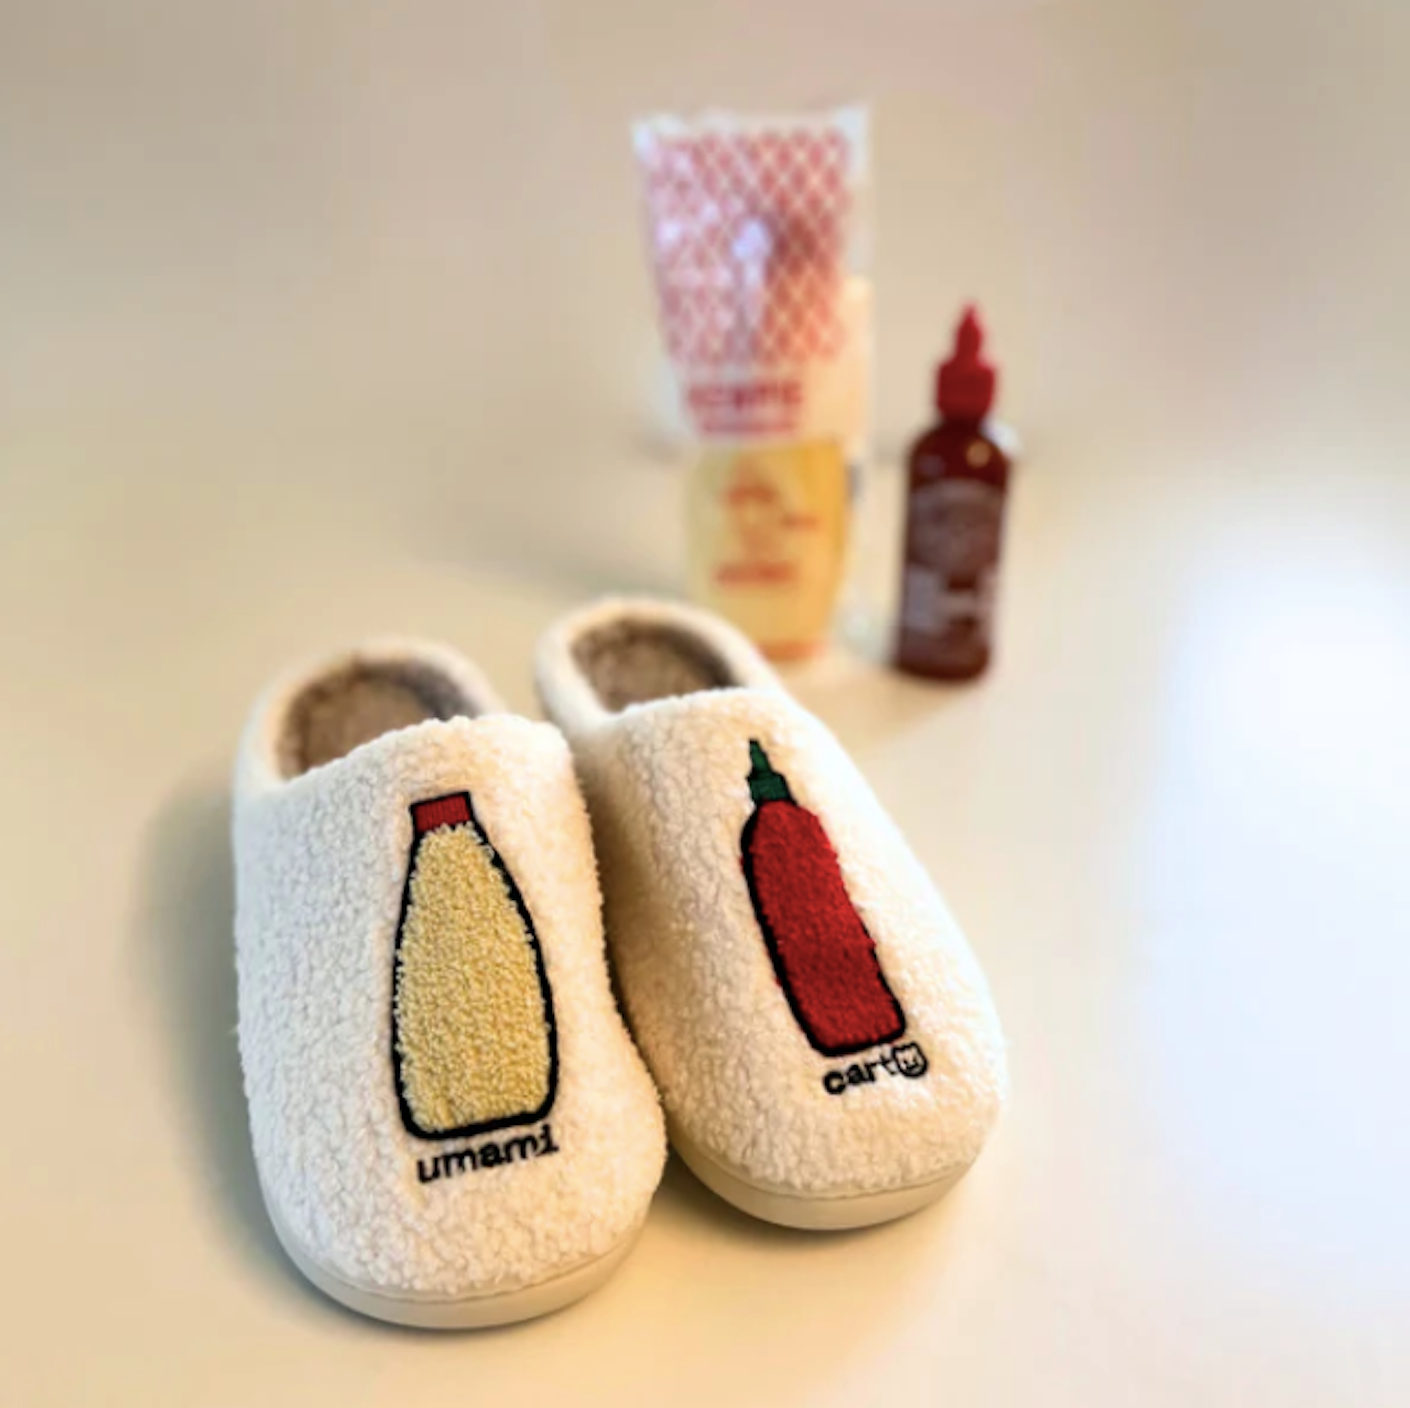 a pair of slippers in the foreground with mayo and siracha in the background